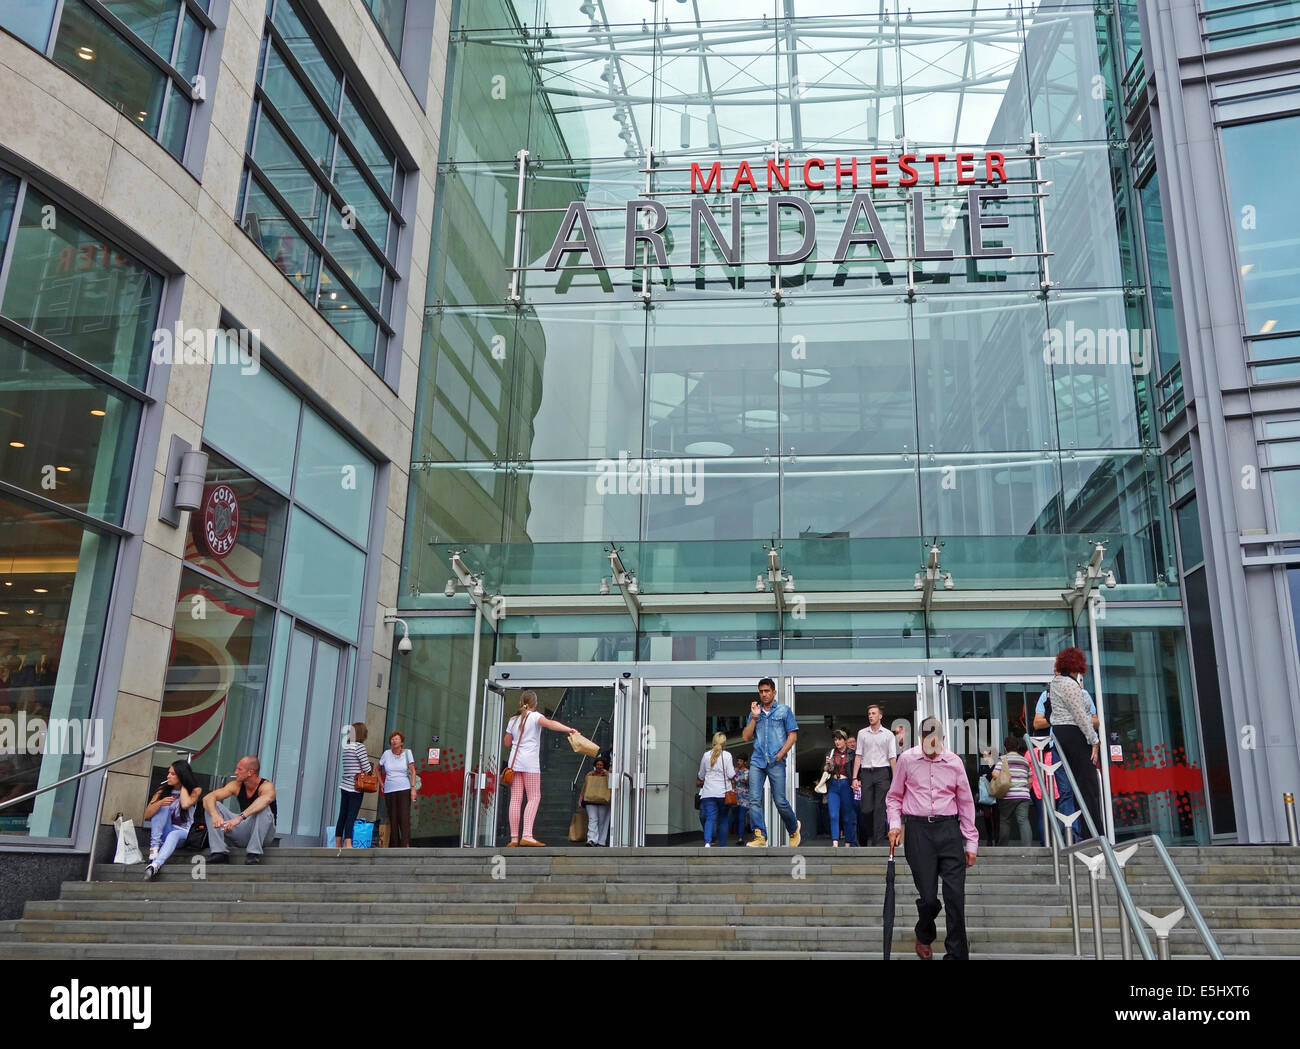 The main Entrance to the Arndale shopping centre in Manchester, England, UK Stock Photo